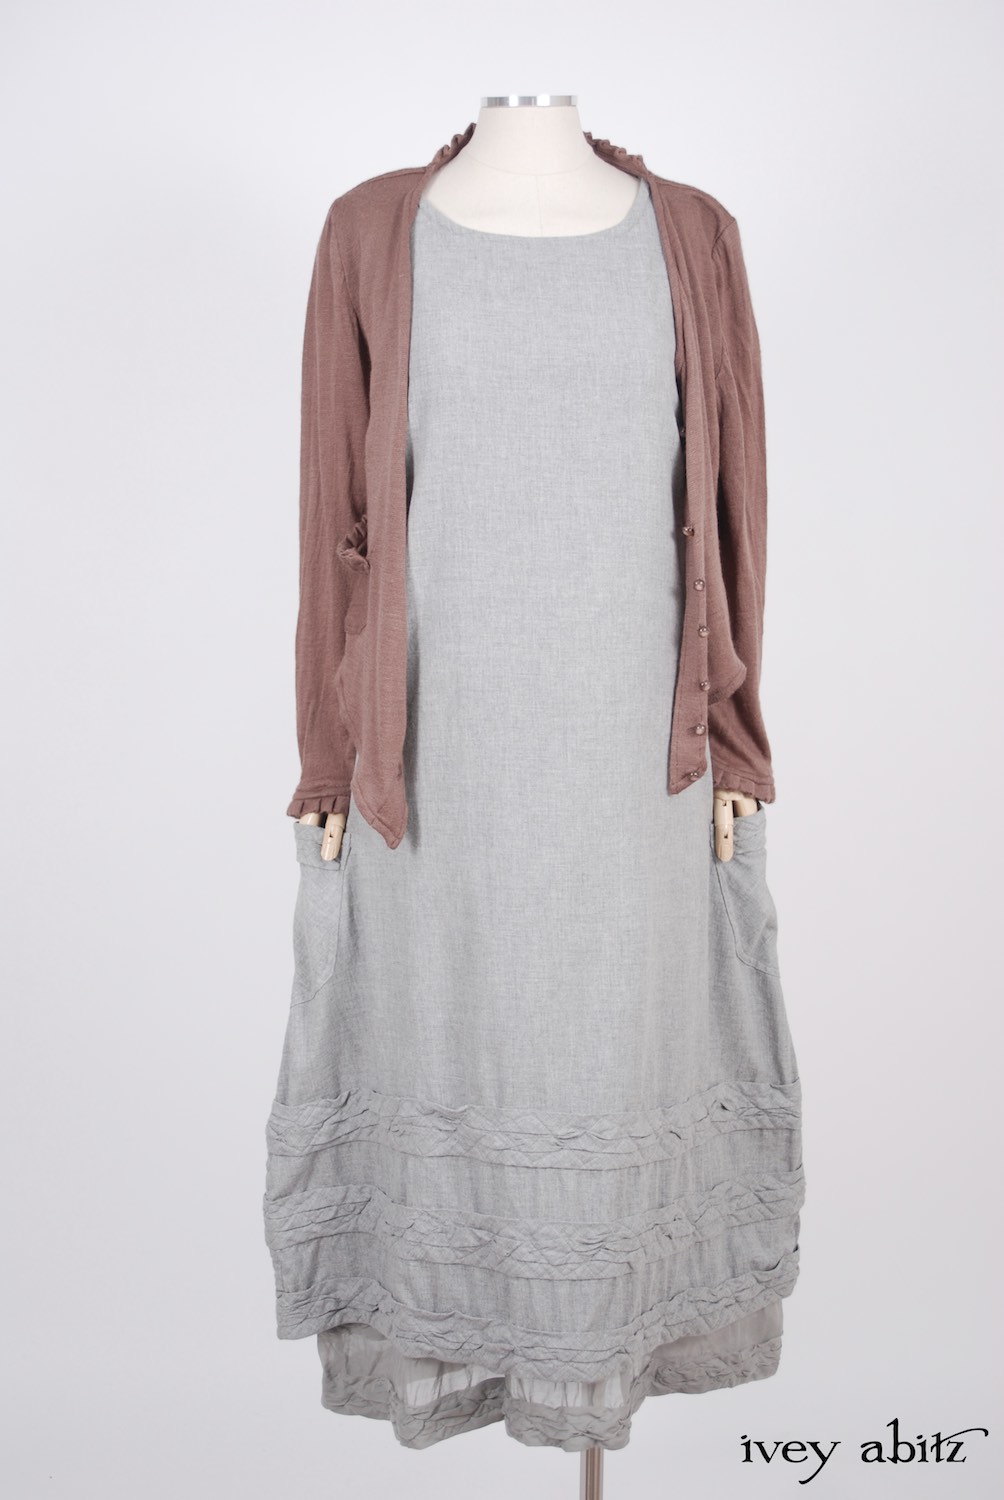 Ivey Abitz - Canterbury Cardigan in Blushed Cashmere Knit  - Tollie Frock in Sparrow Grey Softest Cotton Twill, High Water Length  - Tollie Frock in Sparrow Grey Wispy Silk Voile, Low Water Length